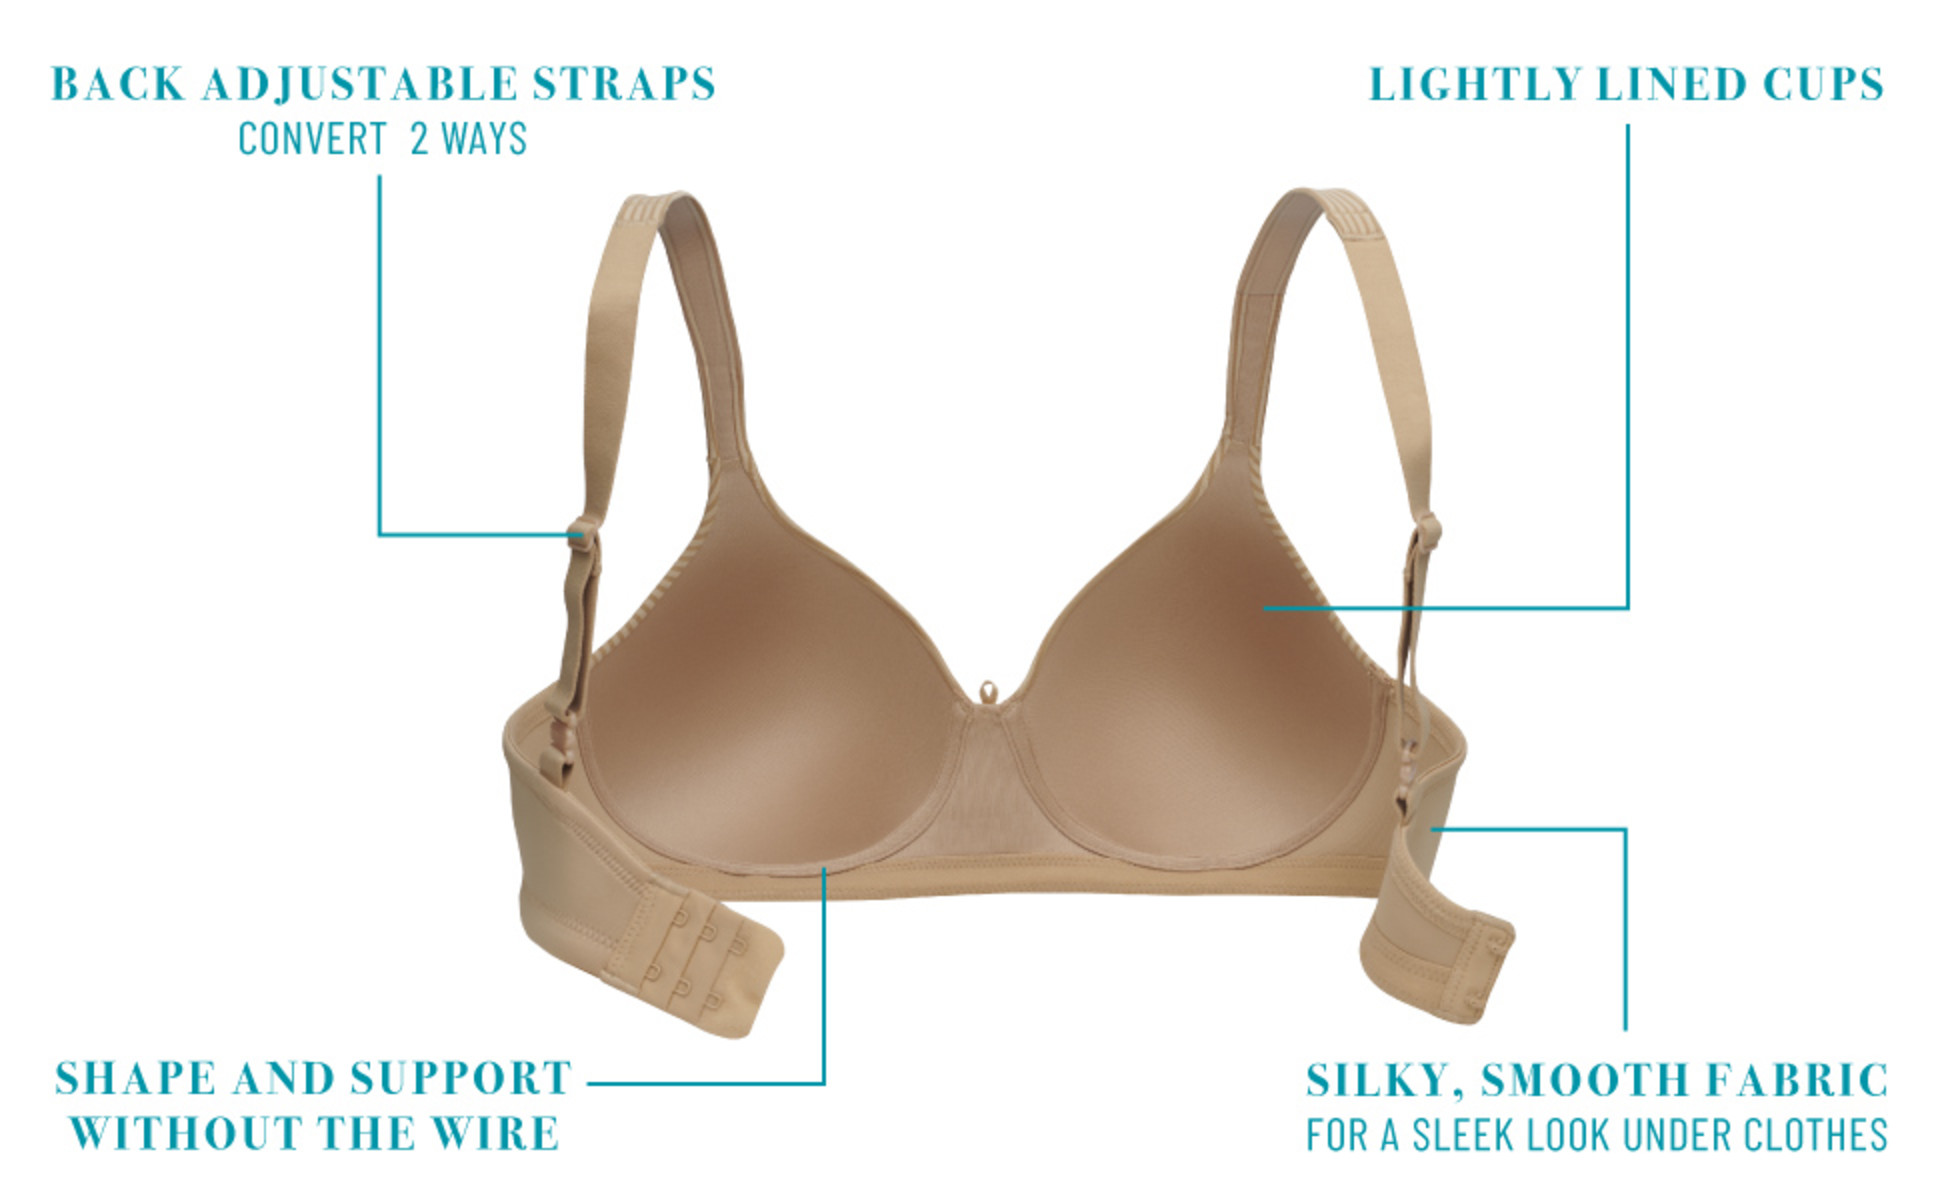 Vanity Fair Body Caress Full Coverage Contour Beige Bra NWT- 36 B Size  undefined - $14 New With Tags - From Kristine